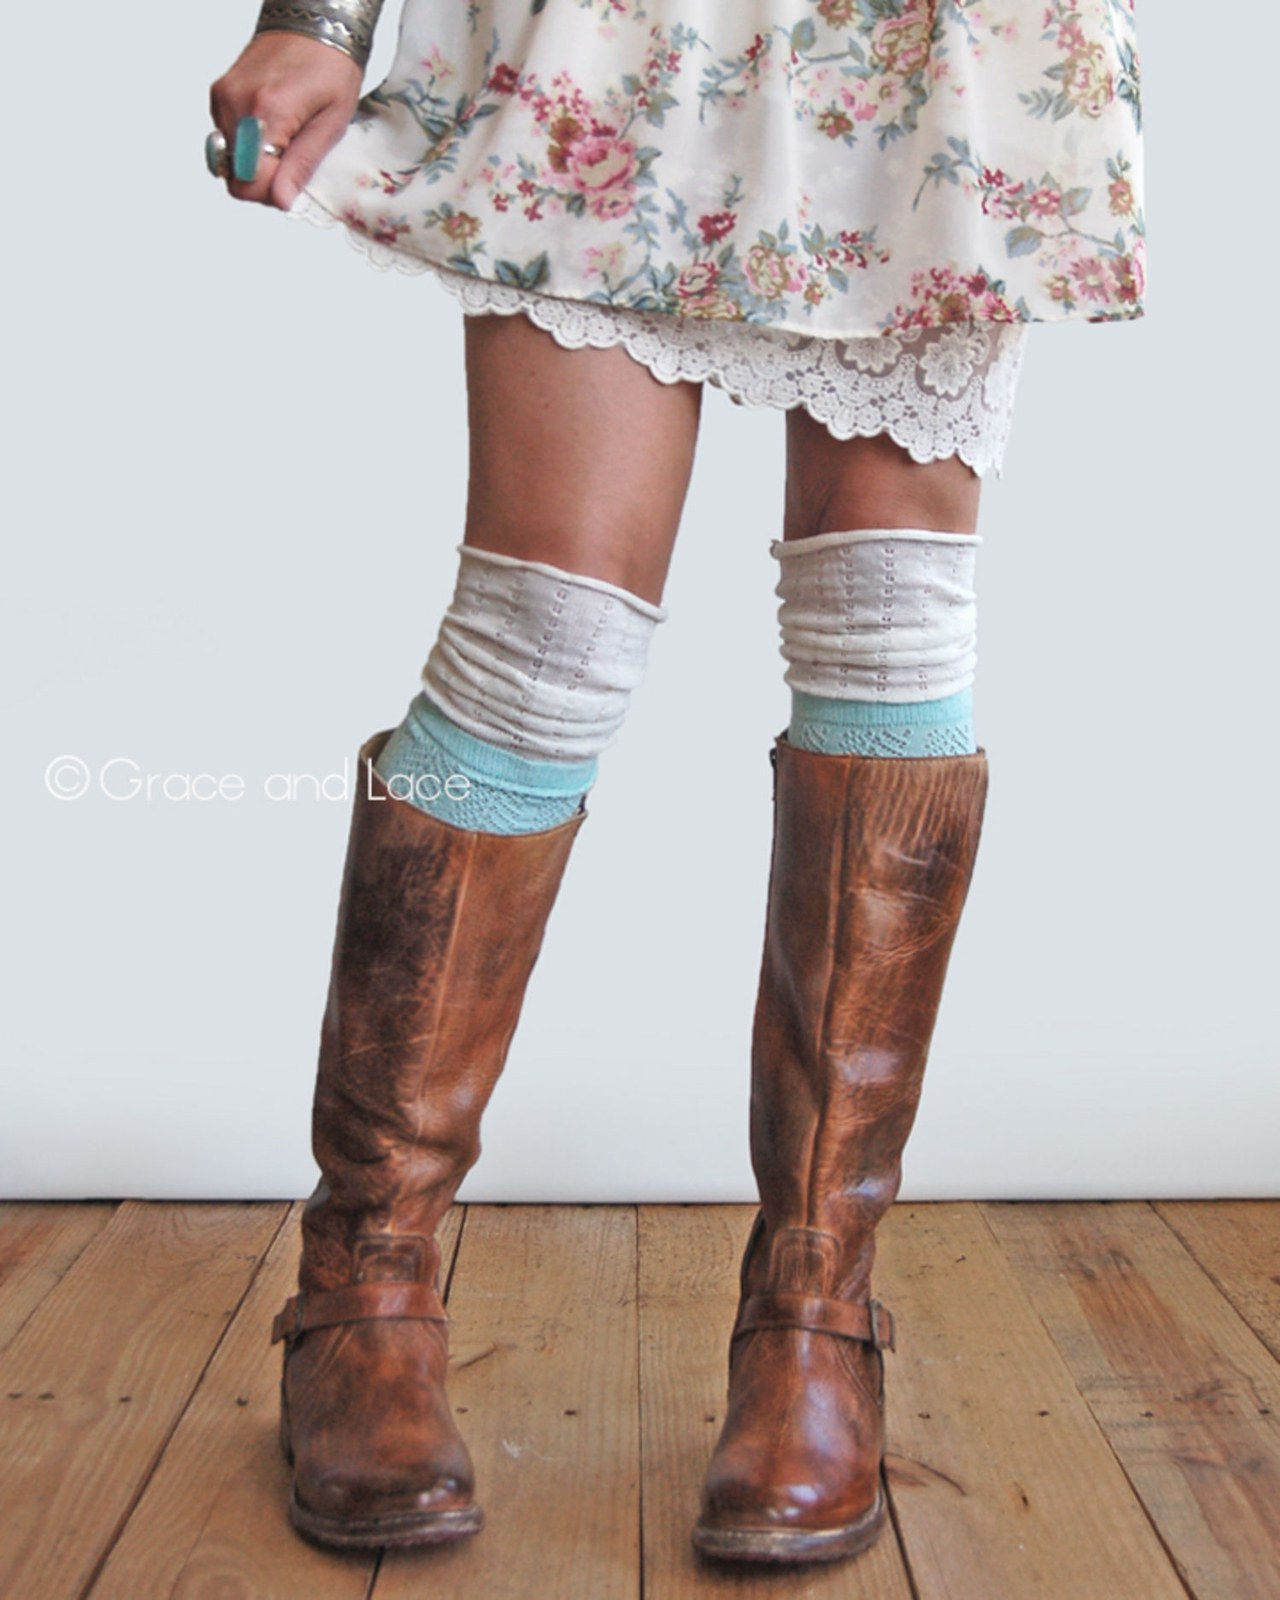 Anmut lace boot socks